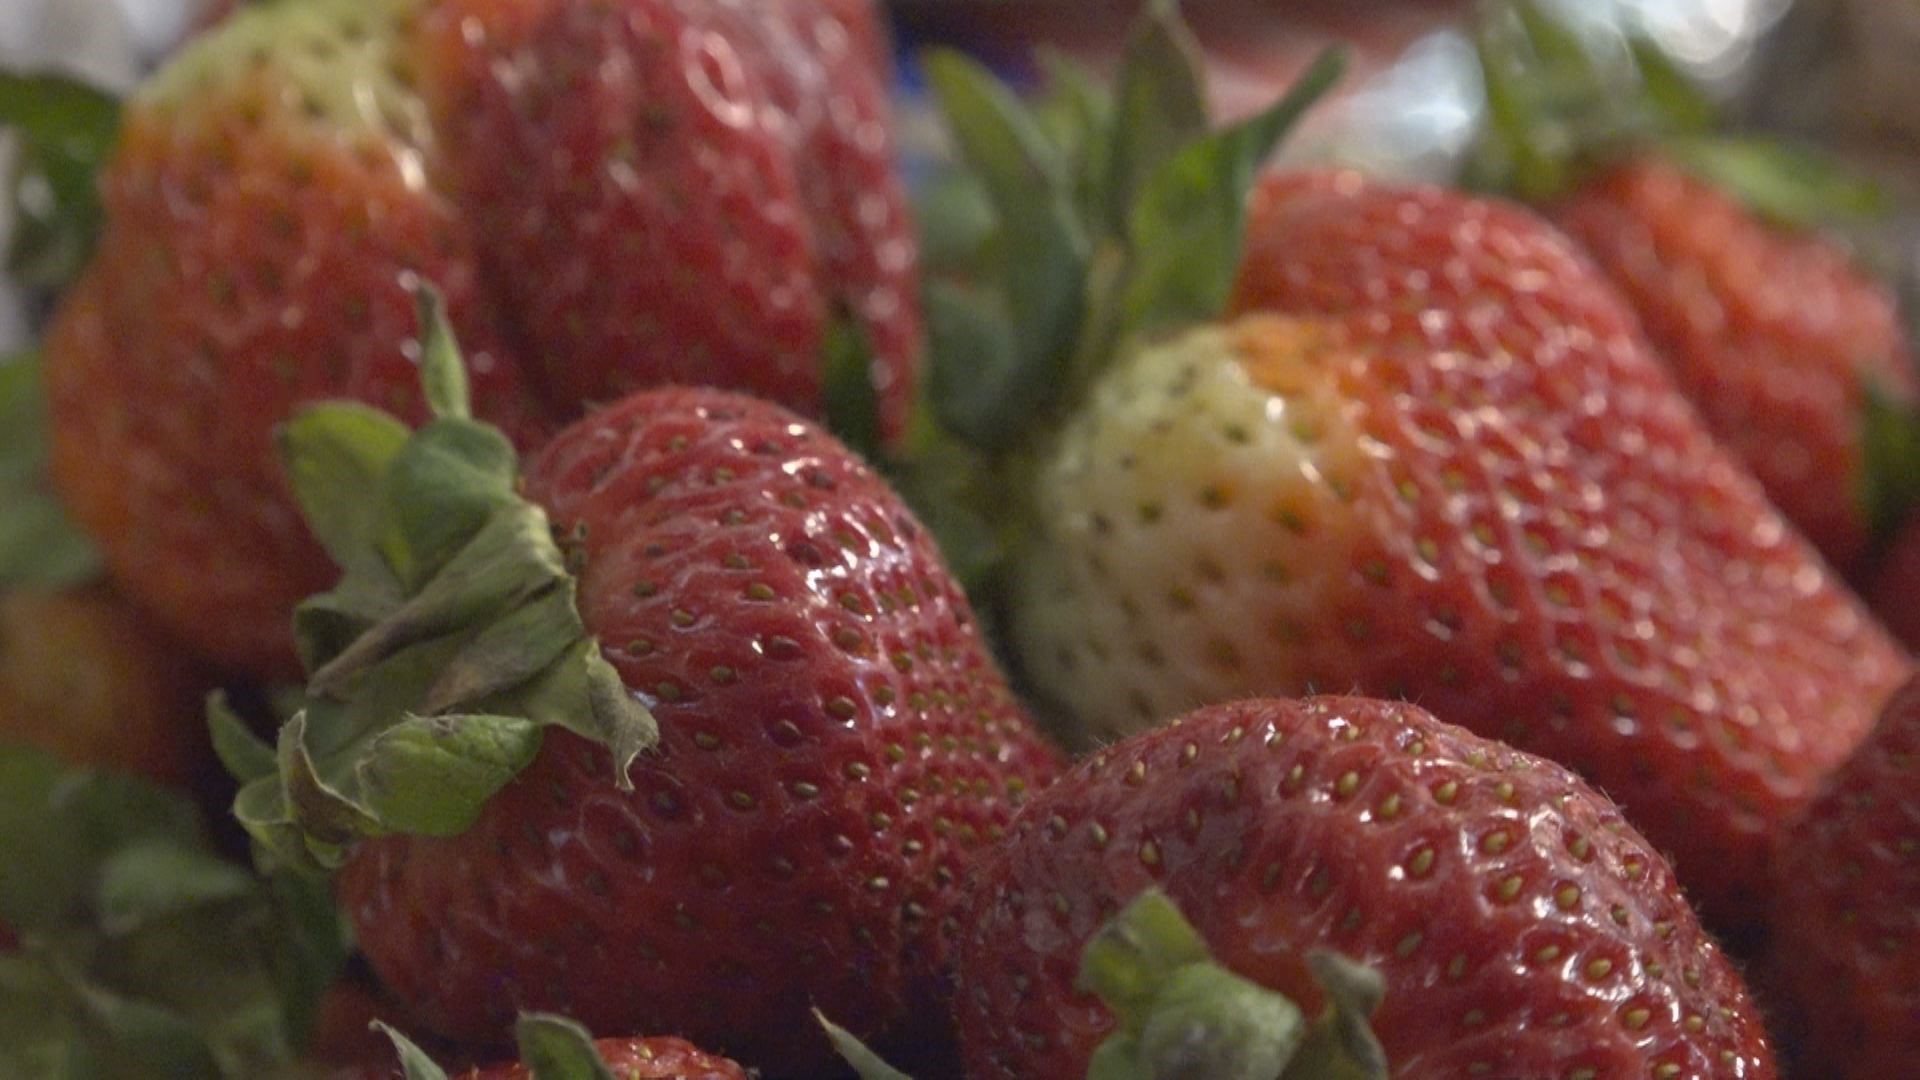 Kimmswick braces for thousands of visitors to Strawberry Festival